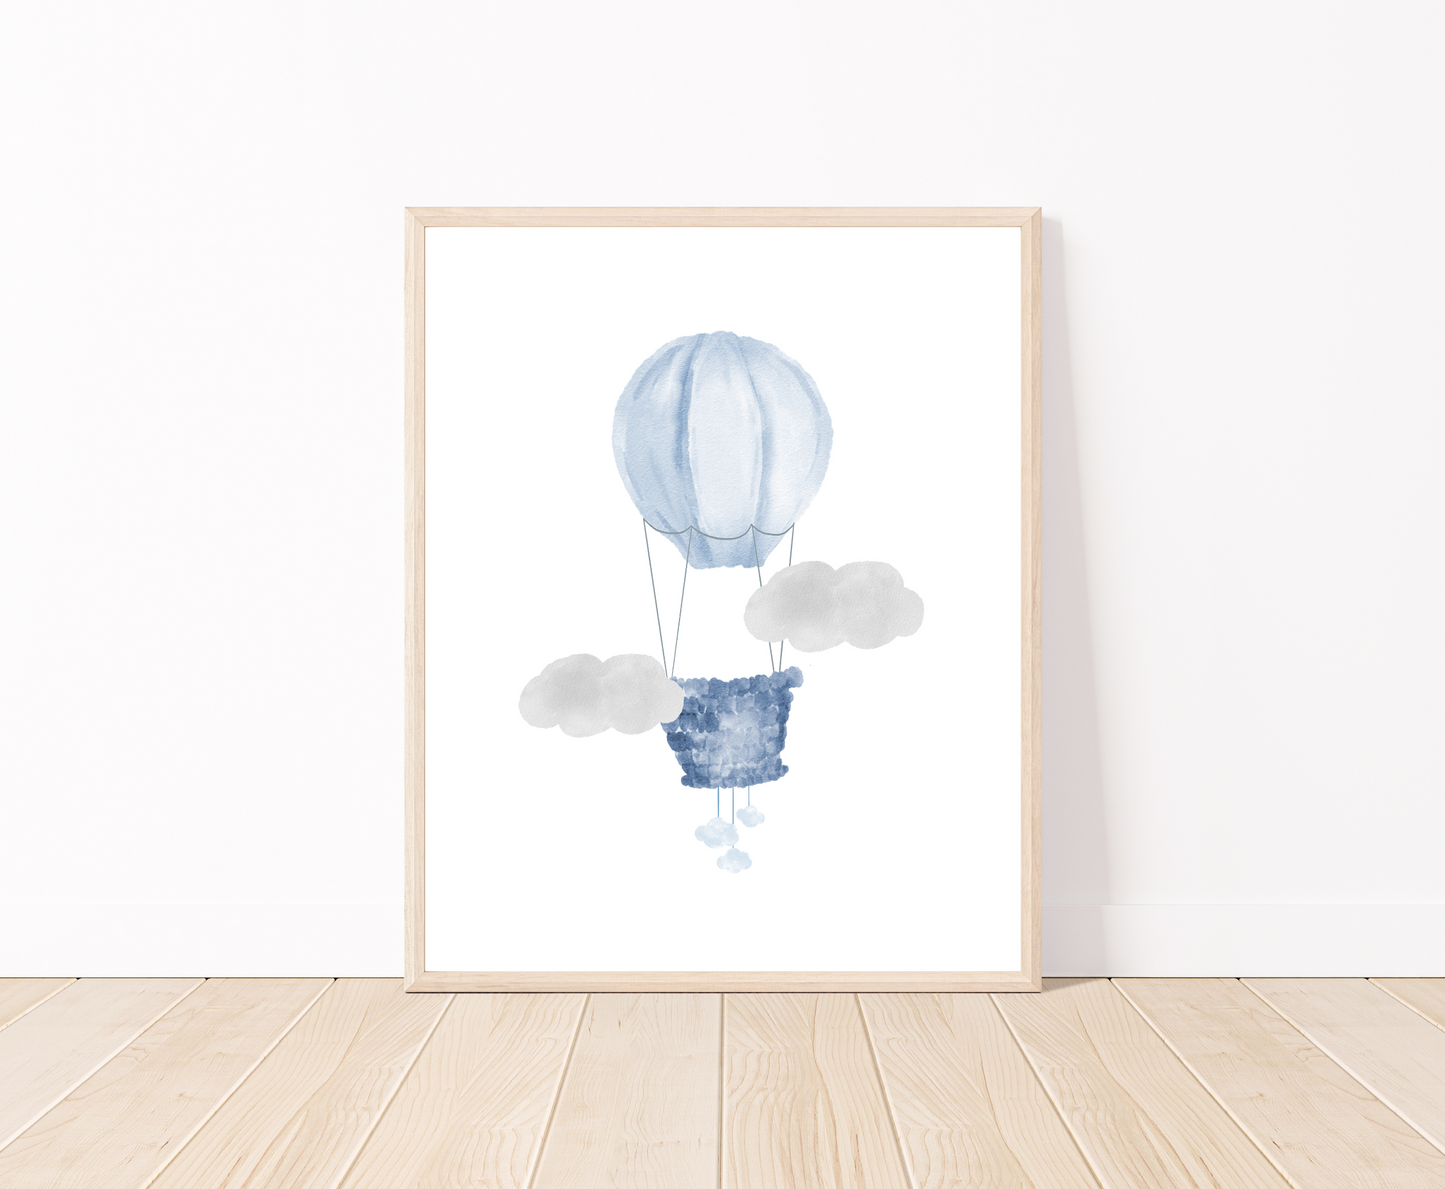 A digital poster is placed on a white wall and parquet flooring and shows a baby blue air balloon and two gray clouds.